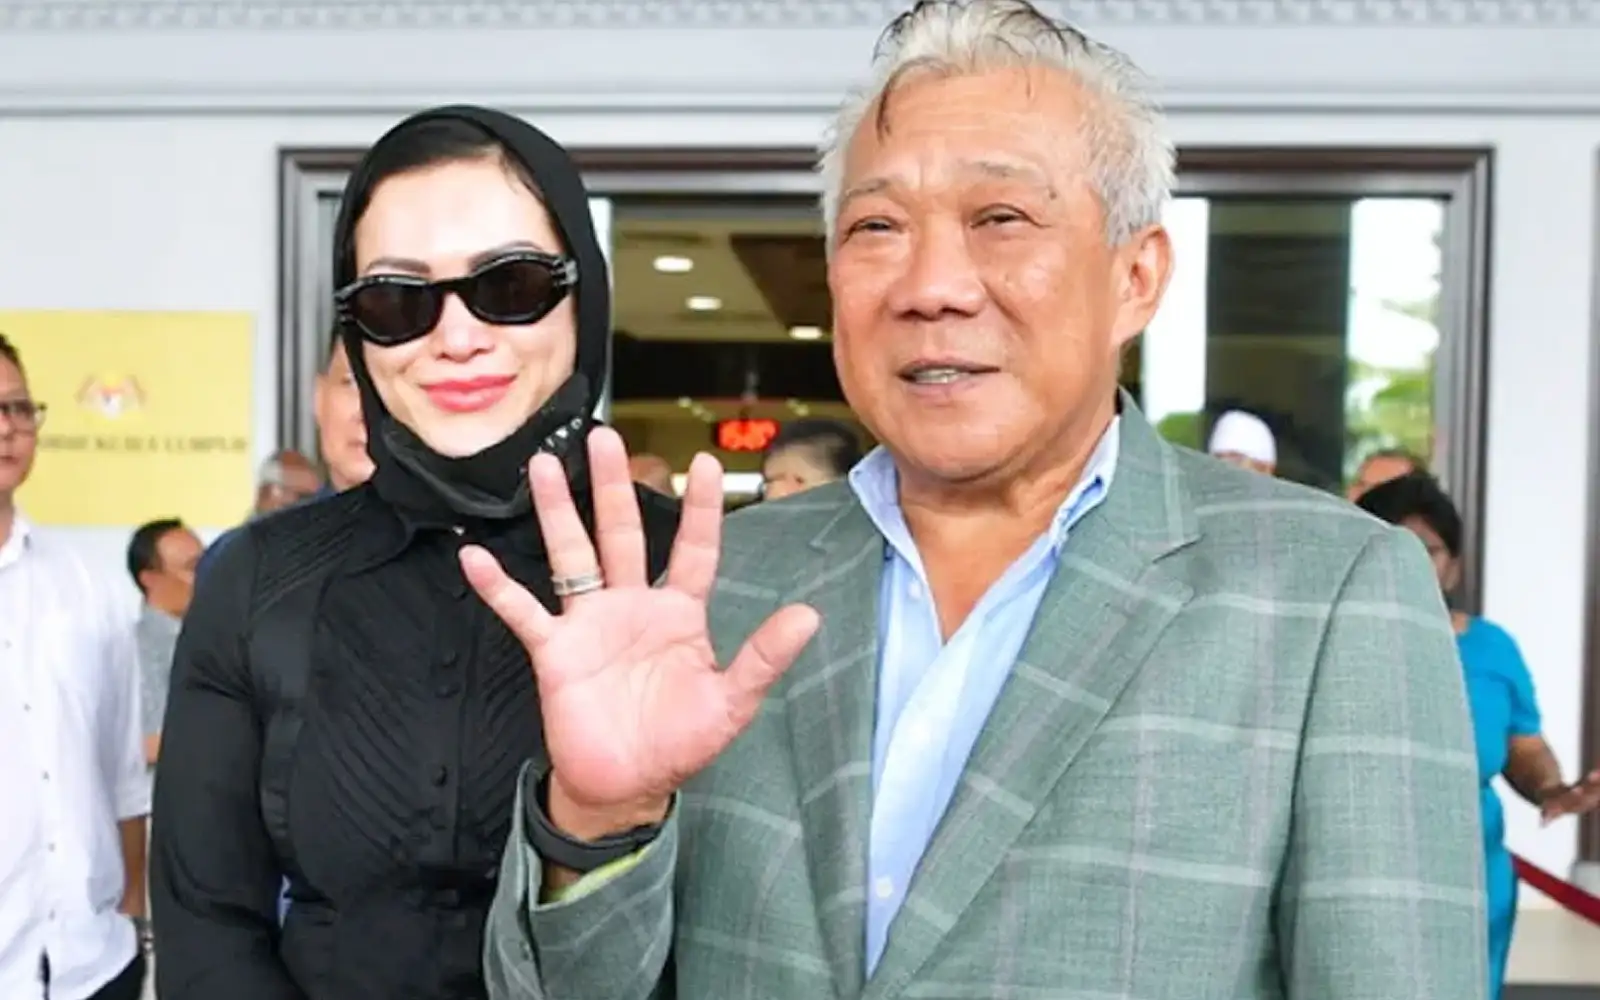 bung, wife acquitted as order to enter defence unjust, says high court judge